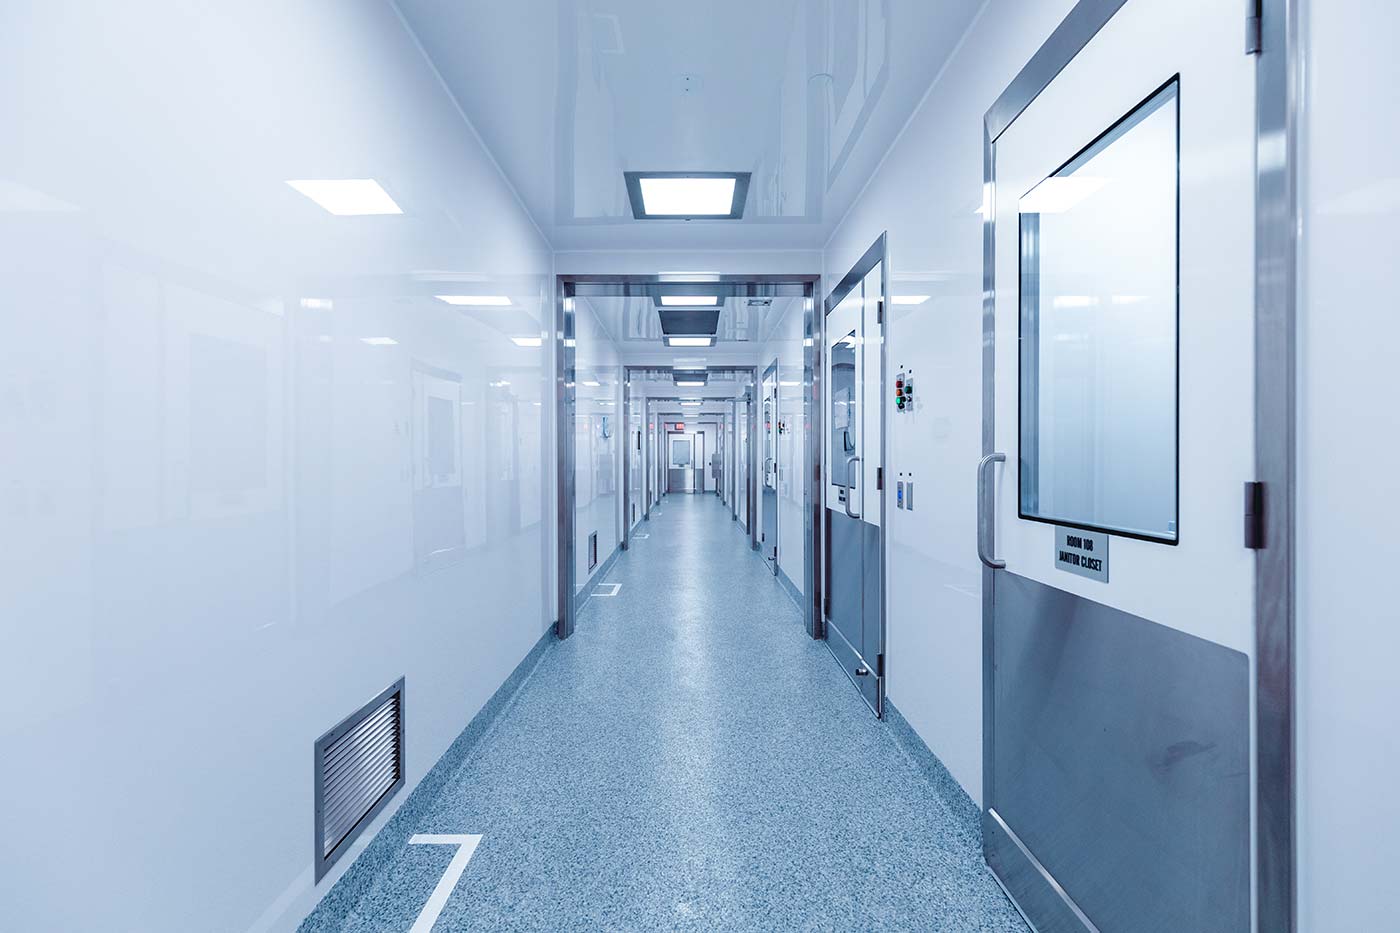 Vibalogics modular BSL-2LS cGMP facility Corridor with wall and vent on the left and multiple doors on the right